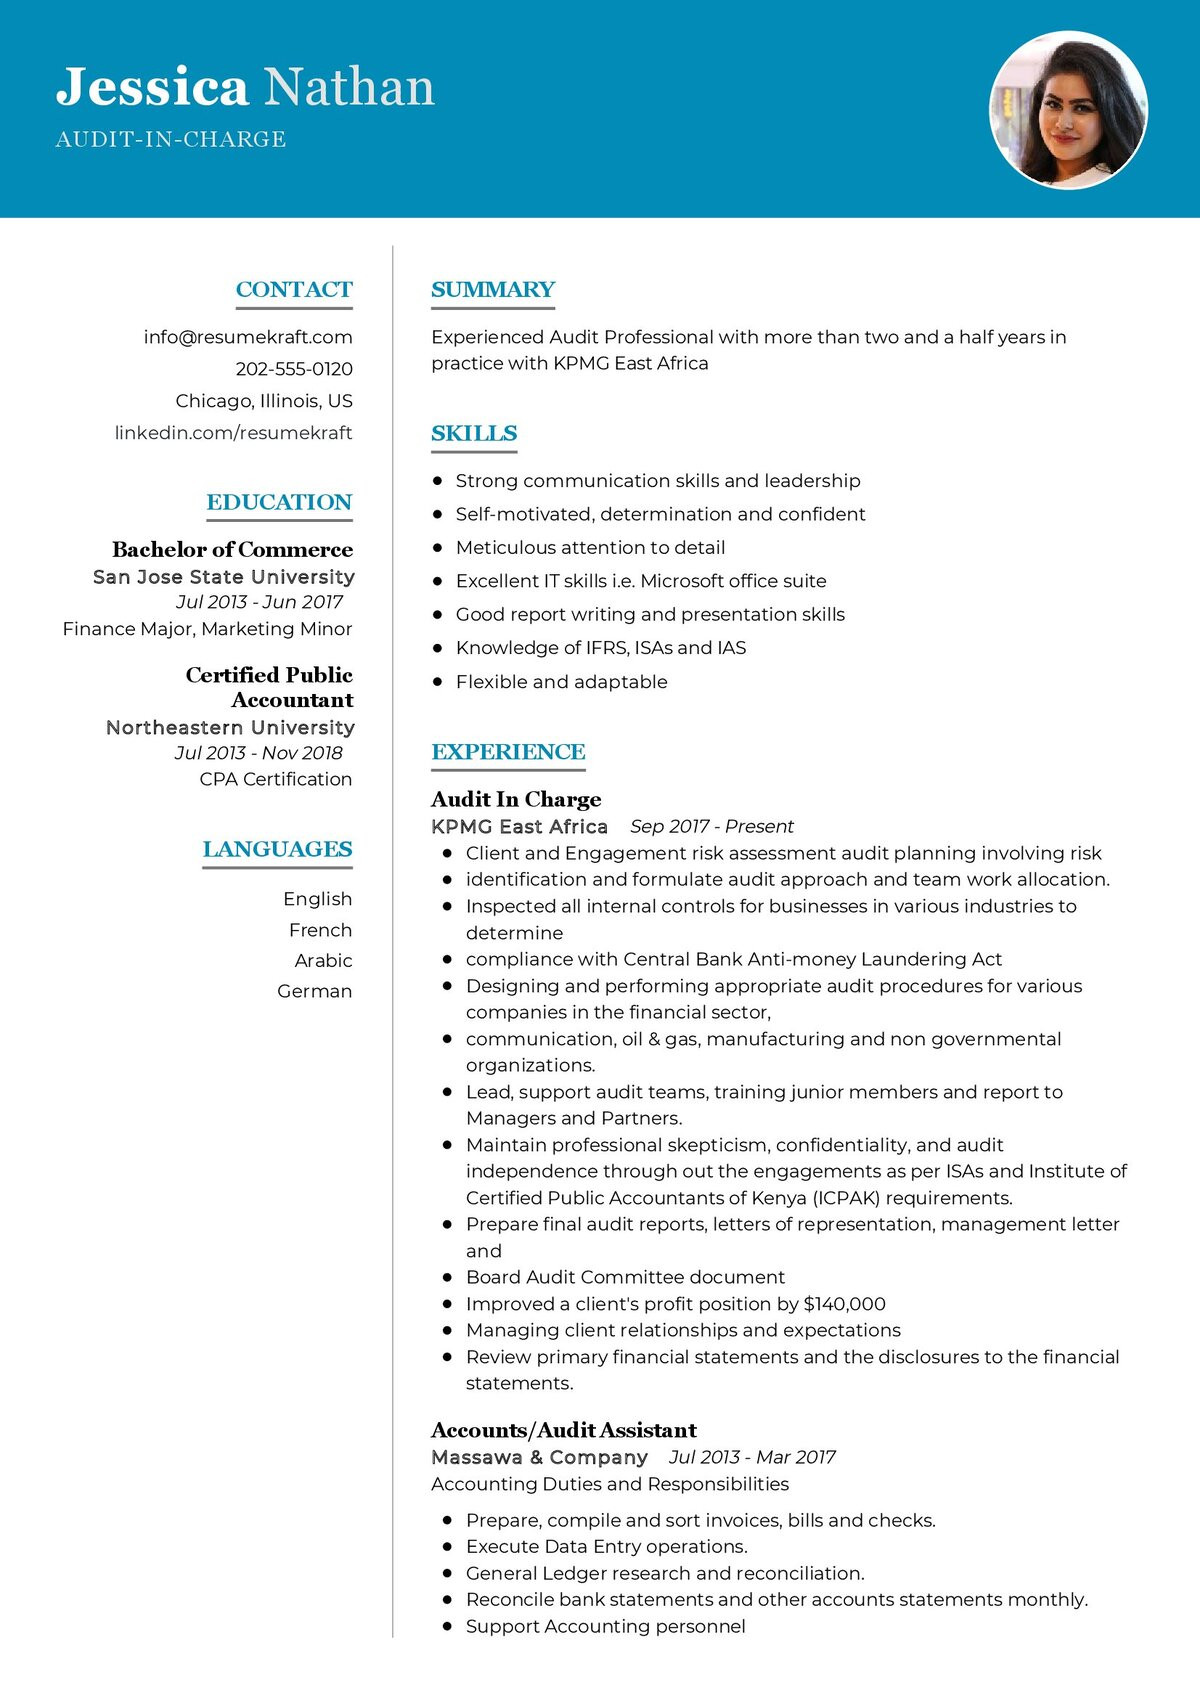 Sample Funtional Resume for A Medical Charge Audit Analist Cv Samples – Page 2 Of 15 2022 – Resumekraft